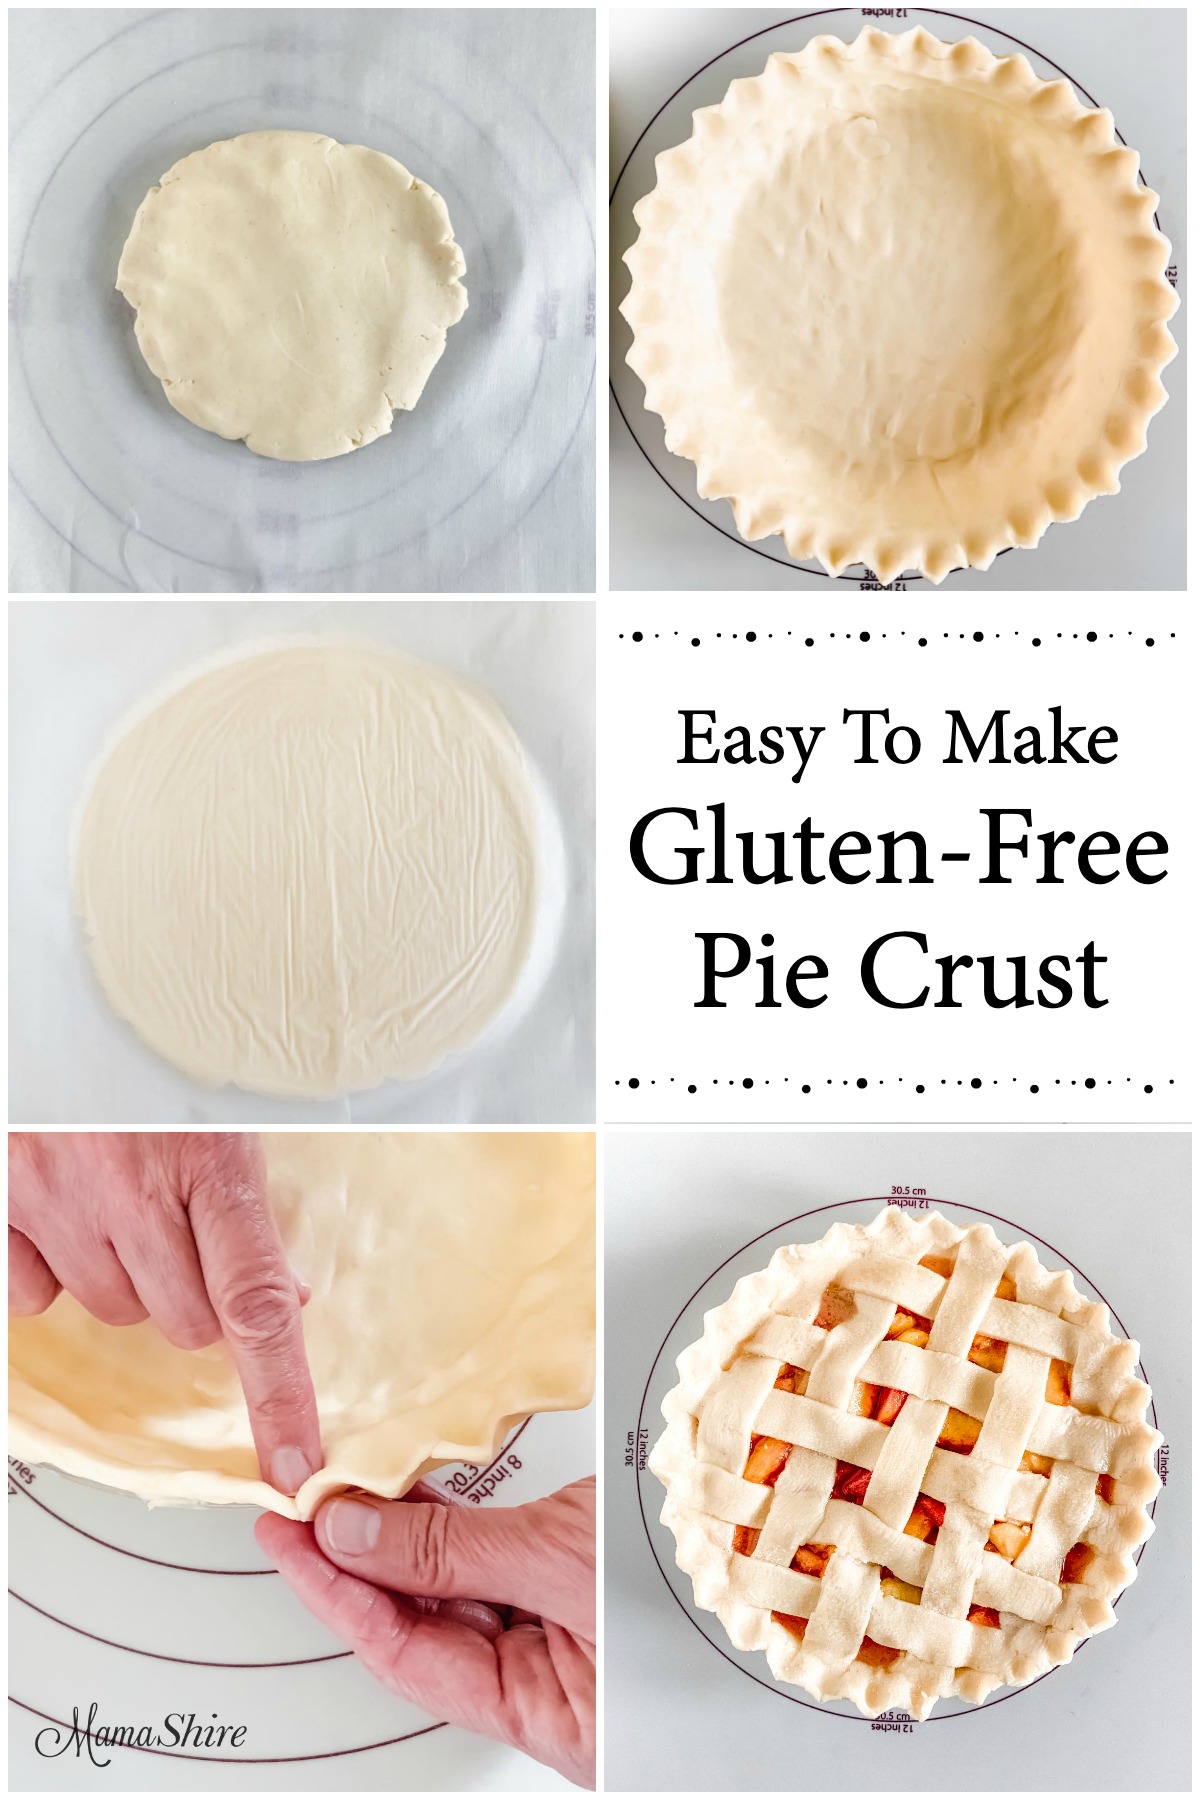 Step by step pictures on how to make gluten-free pie crust.